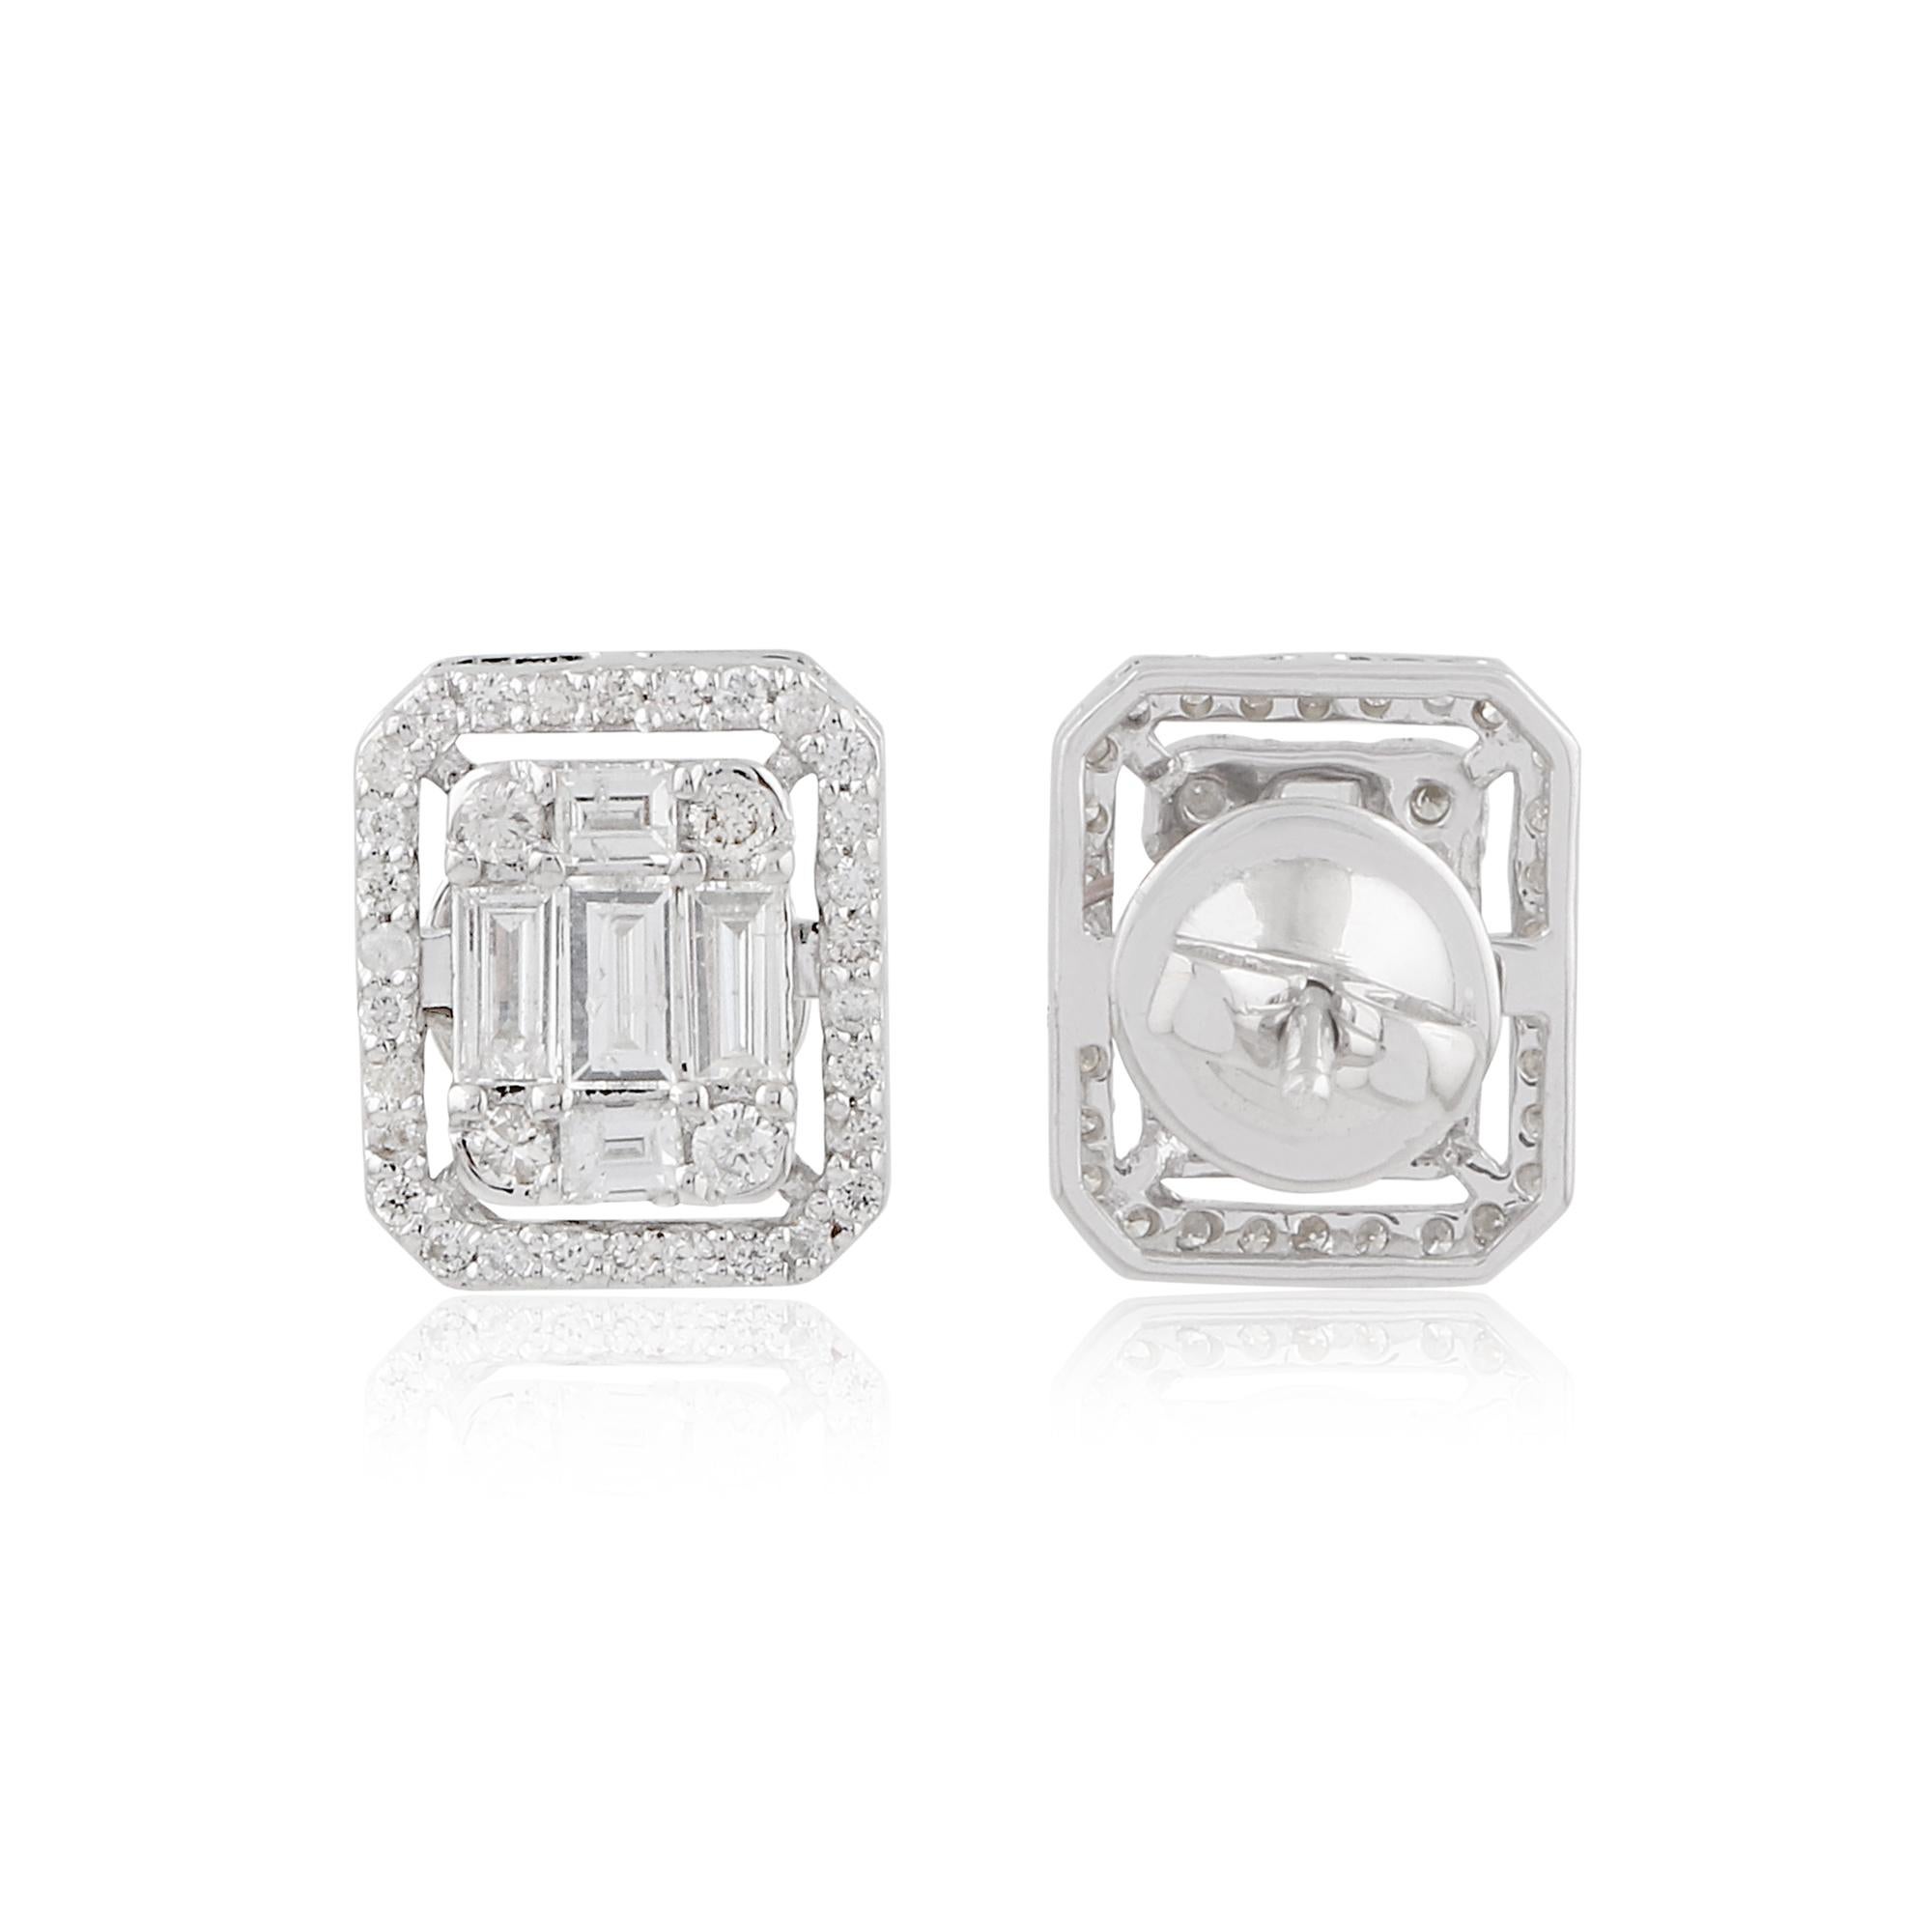 Set in 18k white gold, these earrings exude luxury and refinement. The cool, silvery hue of the white gold perfectly complements the dazzling diamonds, creating a harmonious and captivating aesthetic. The secure stud setting ensures that these